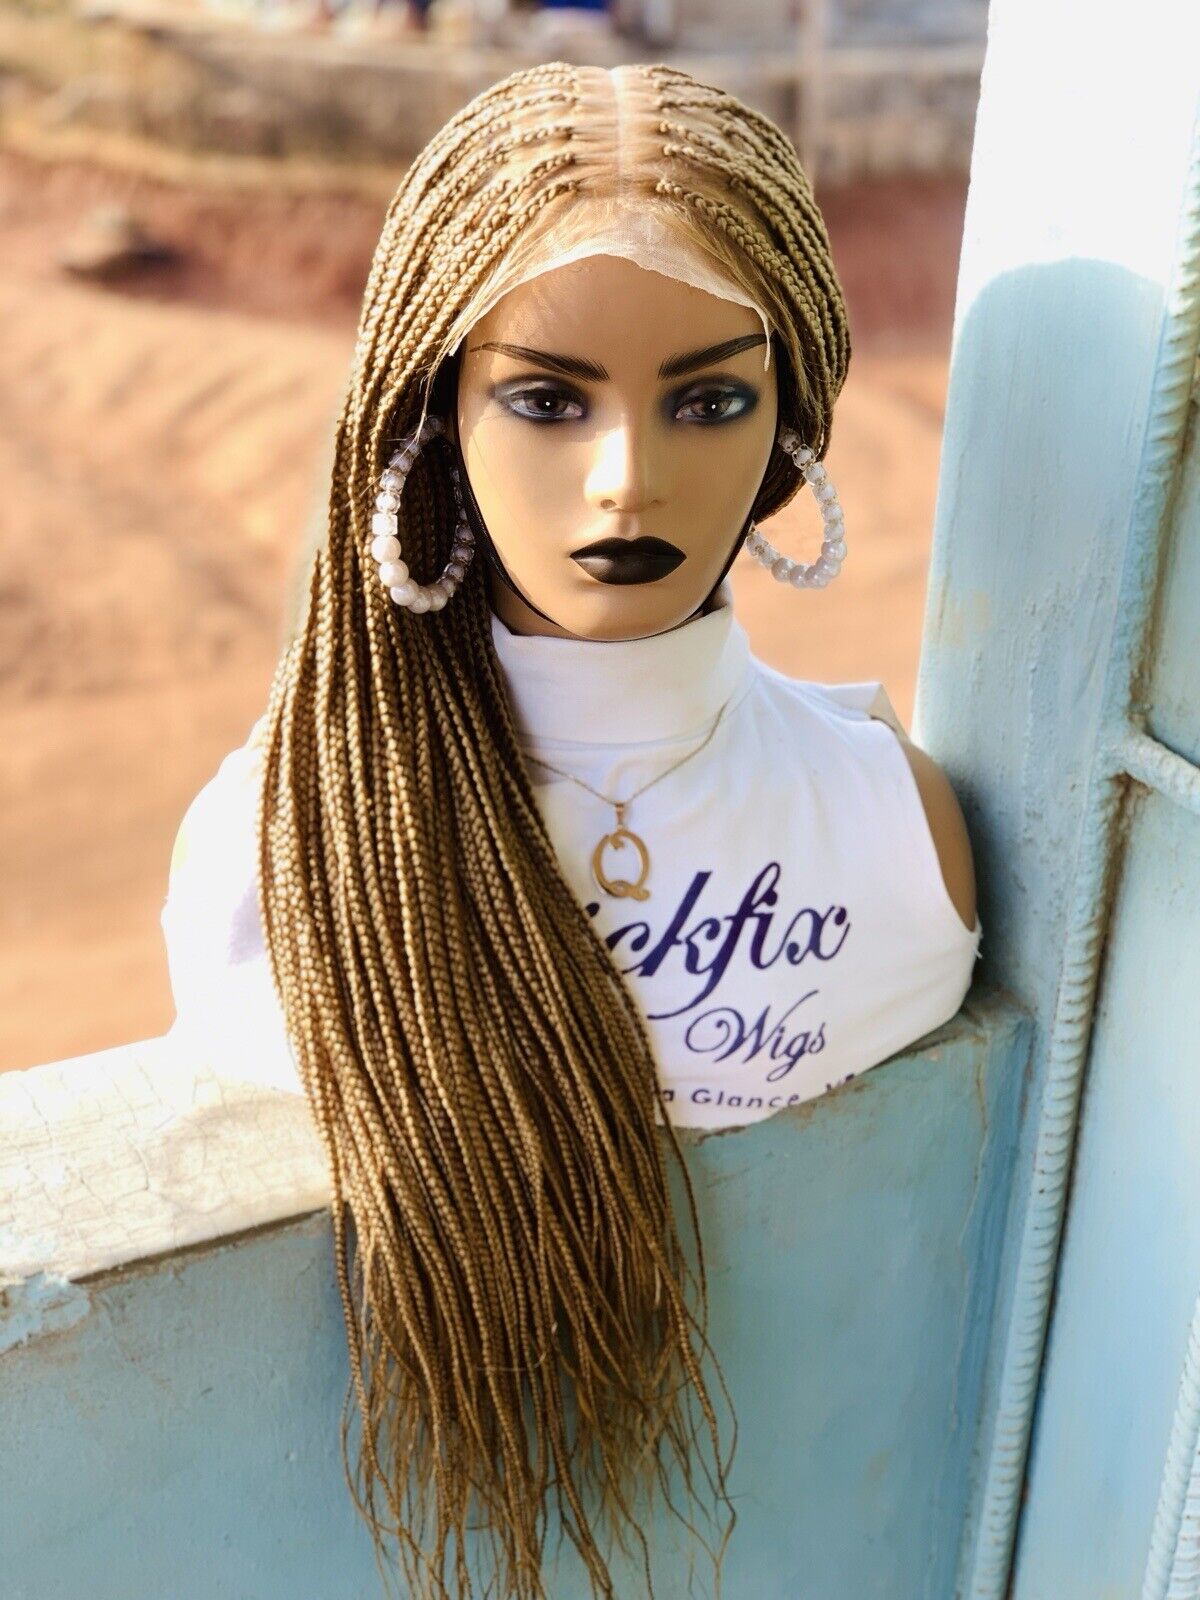 Blonde Knotless Braids wig on full lace wig